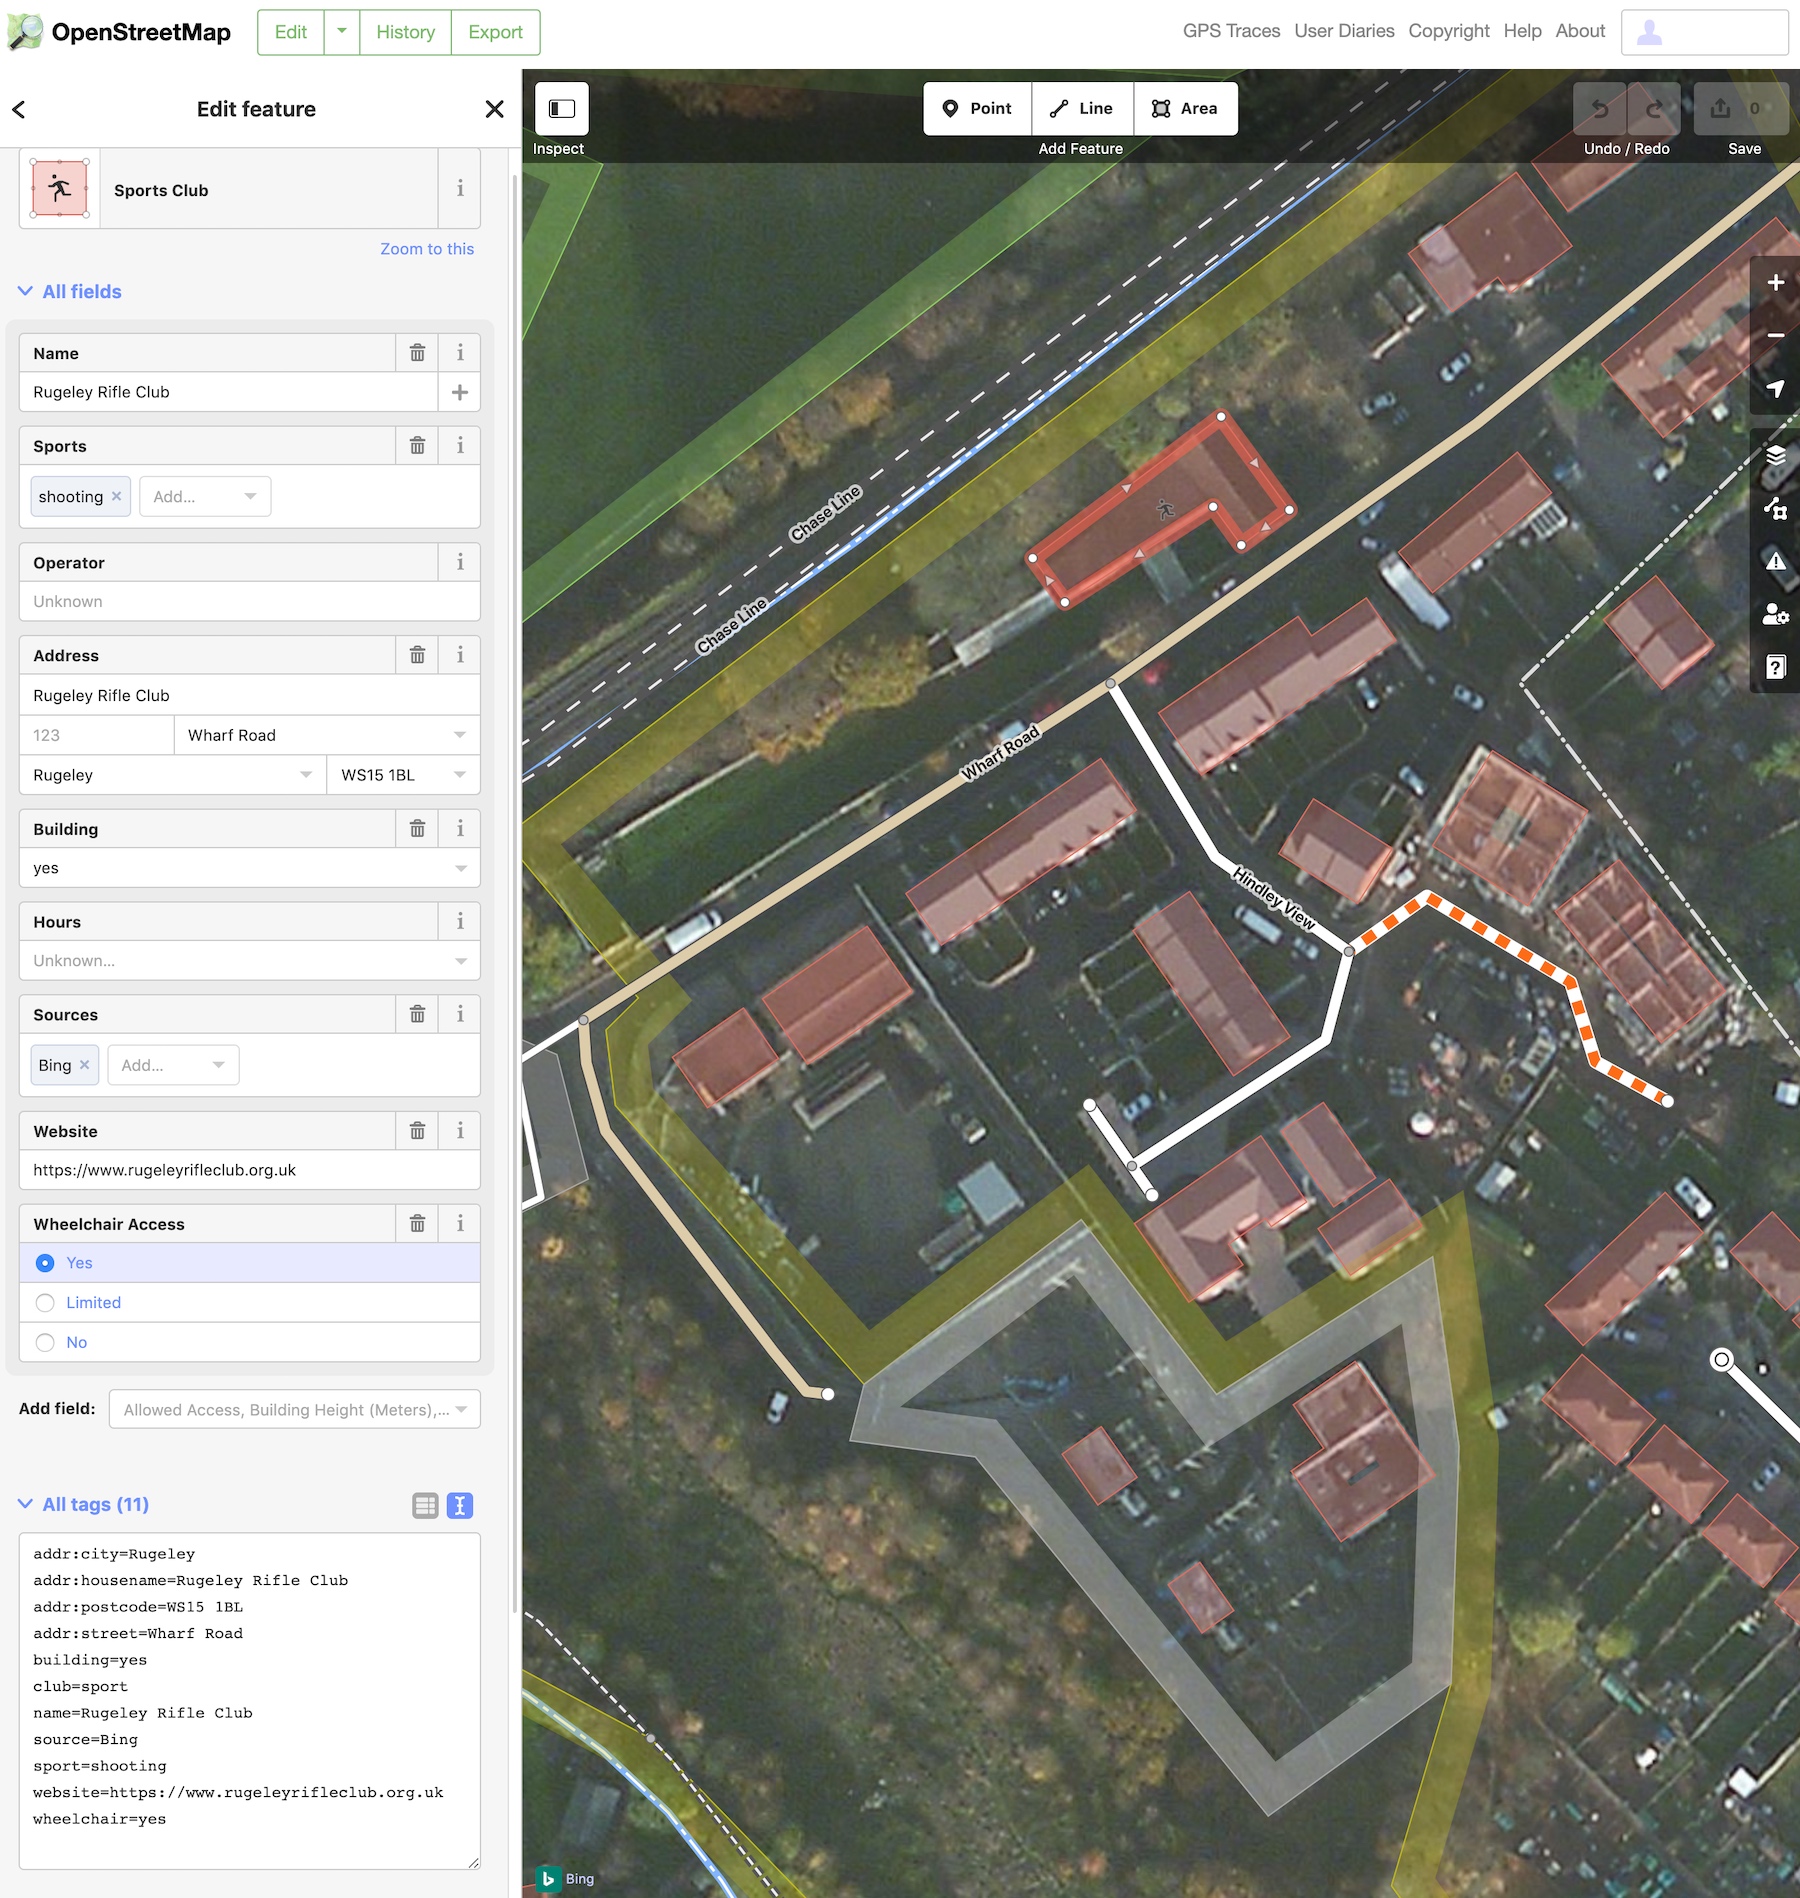 A screenshot of OpenStreetMap with a Rifle Club object open for editing